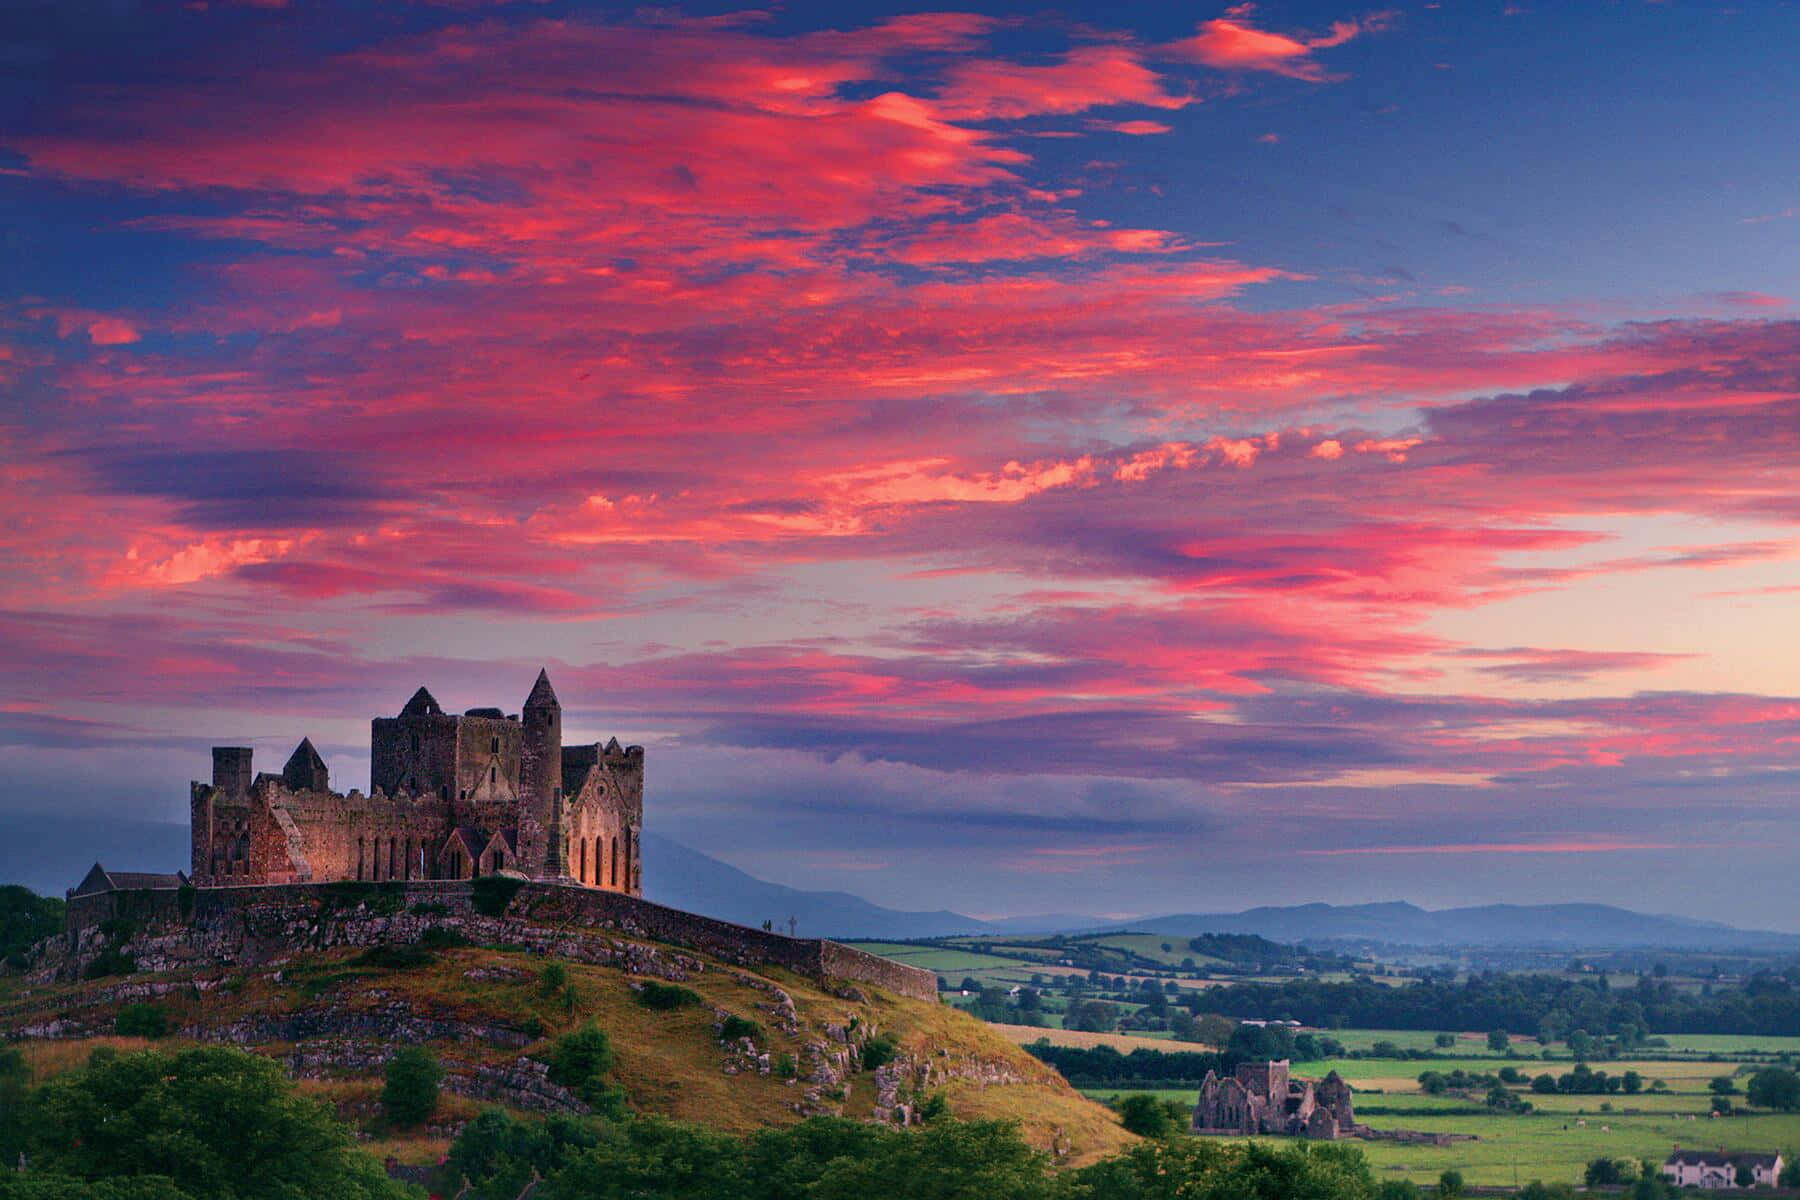 Embrace the beauty of the Emerald Isle!